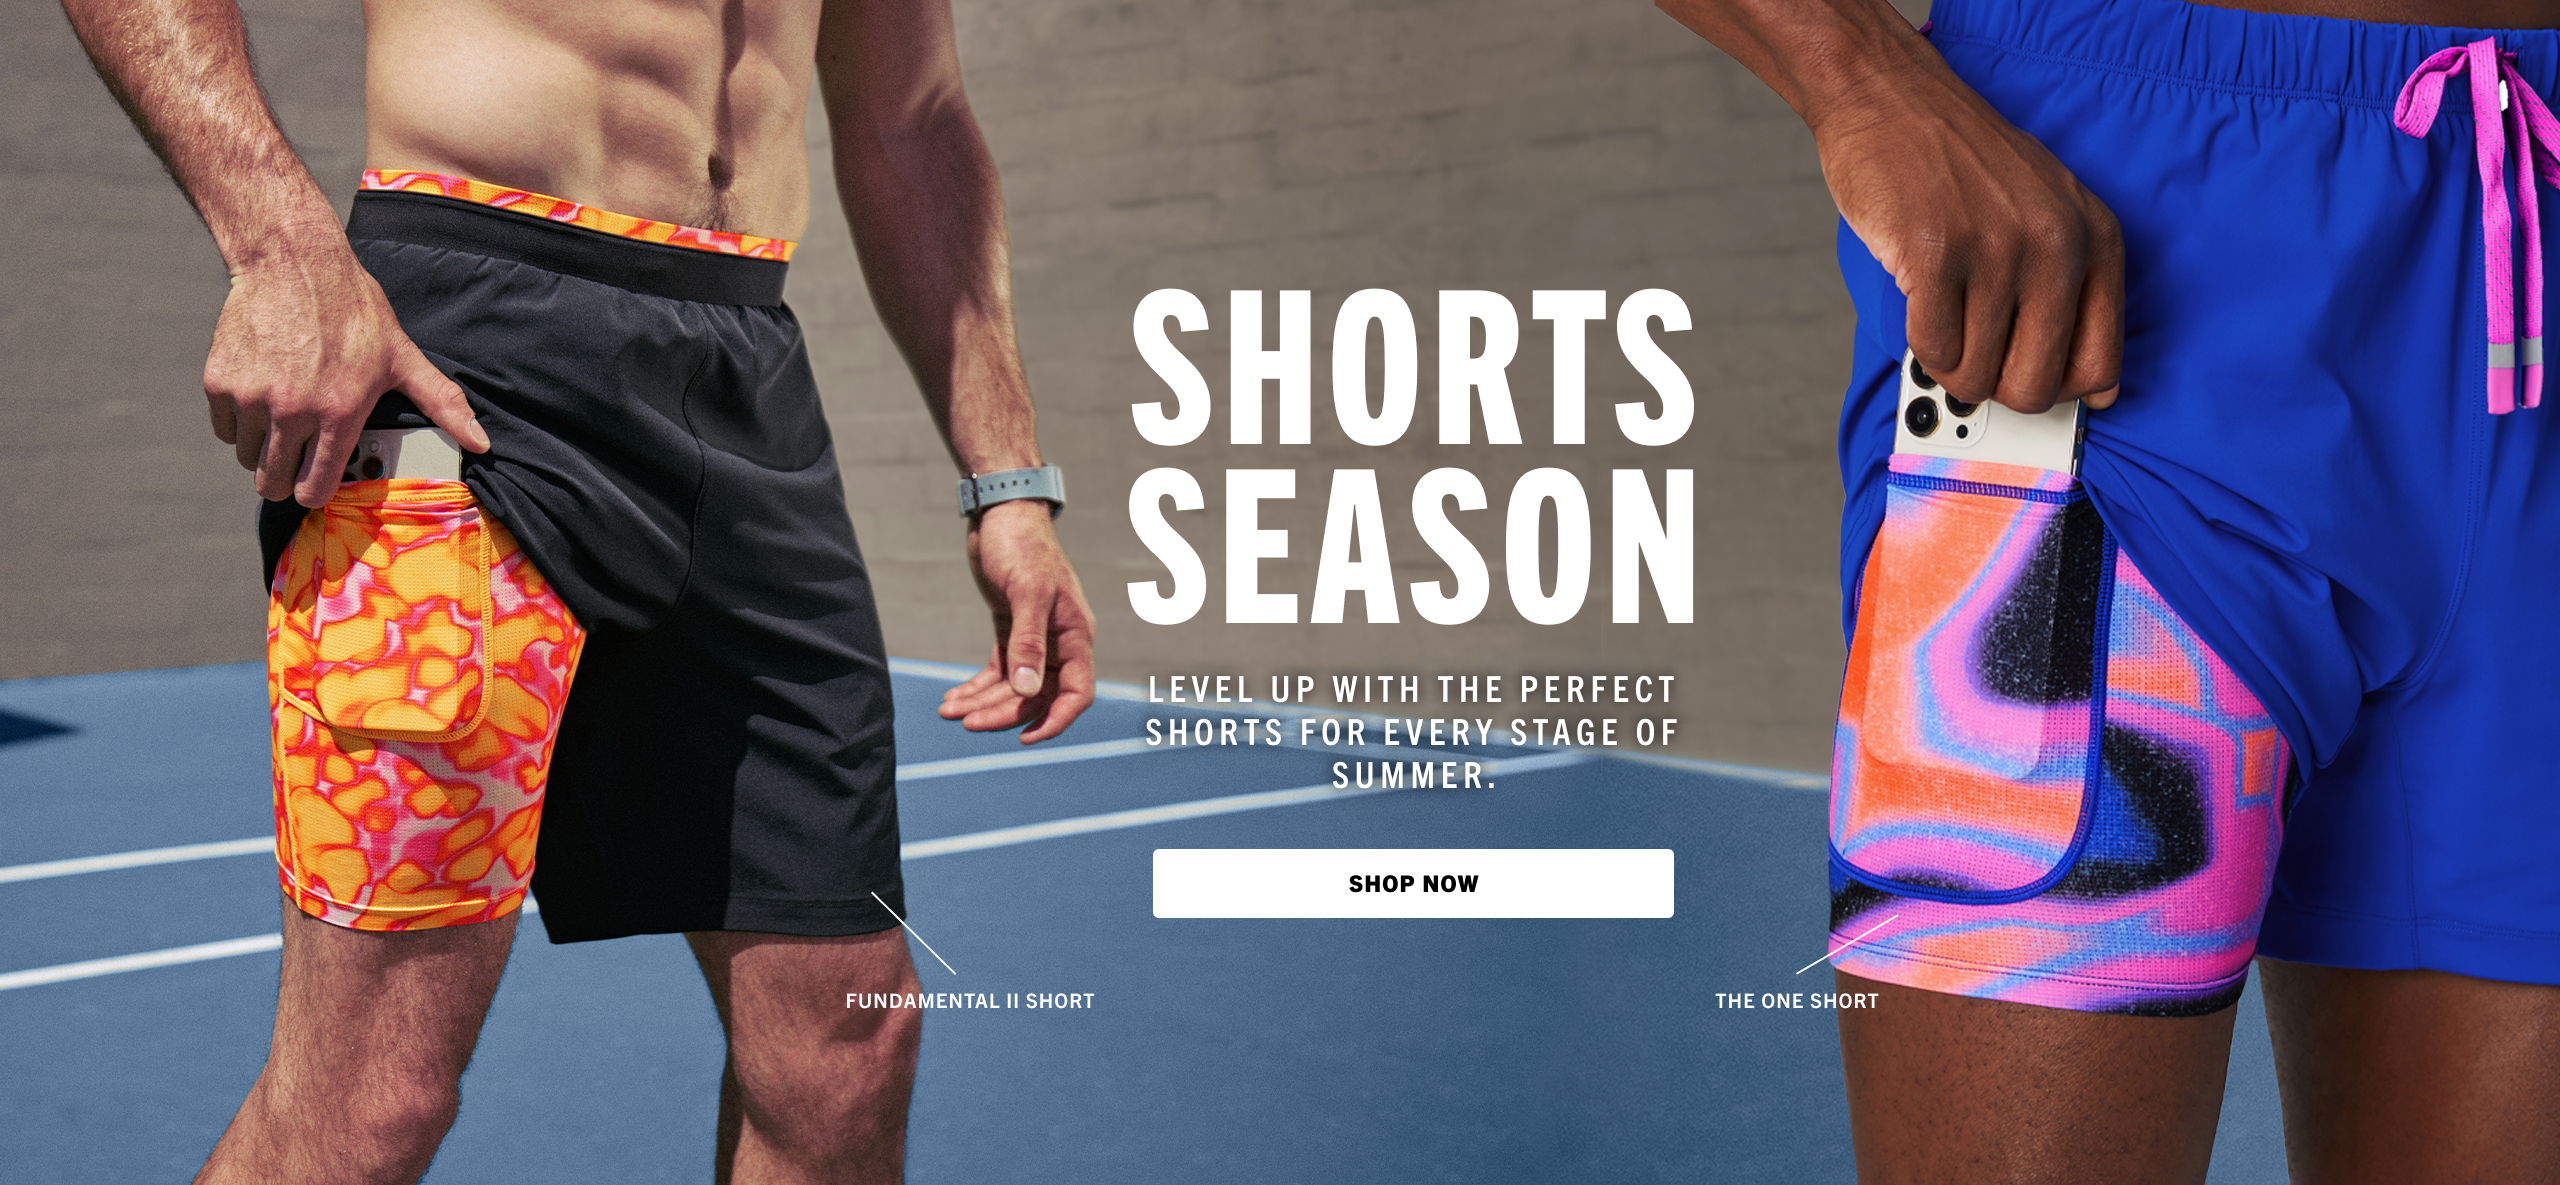 It's Shorts Season! Level up with the perfect shorts for every stage of summer.